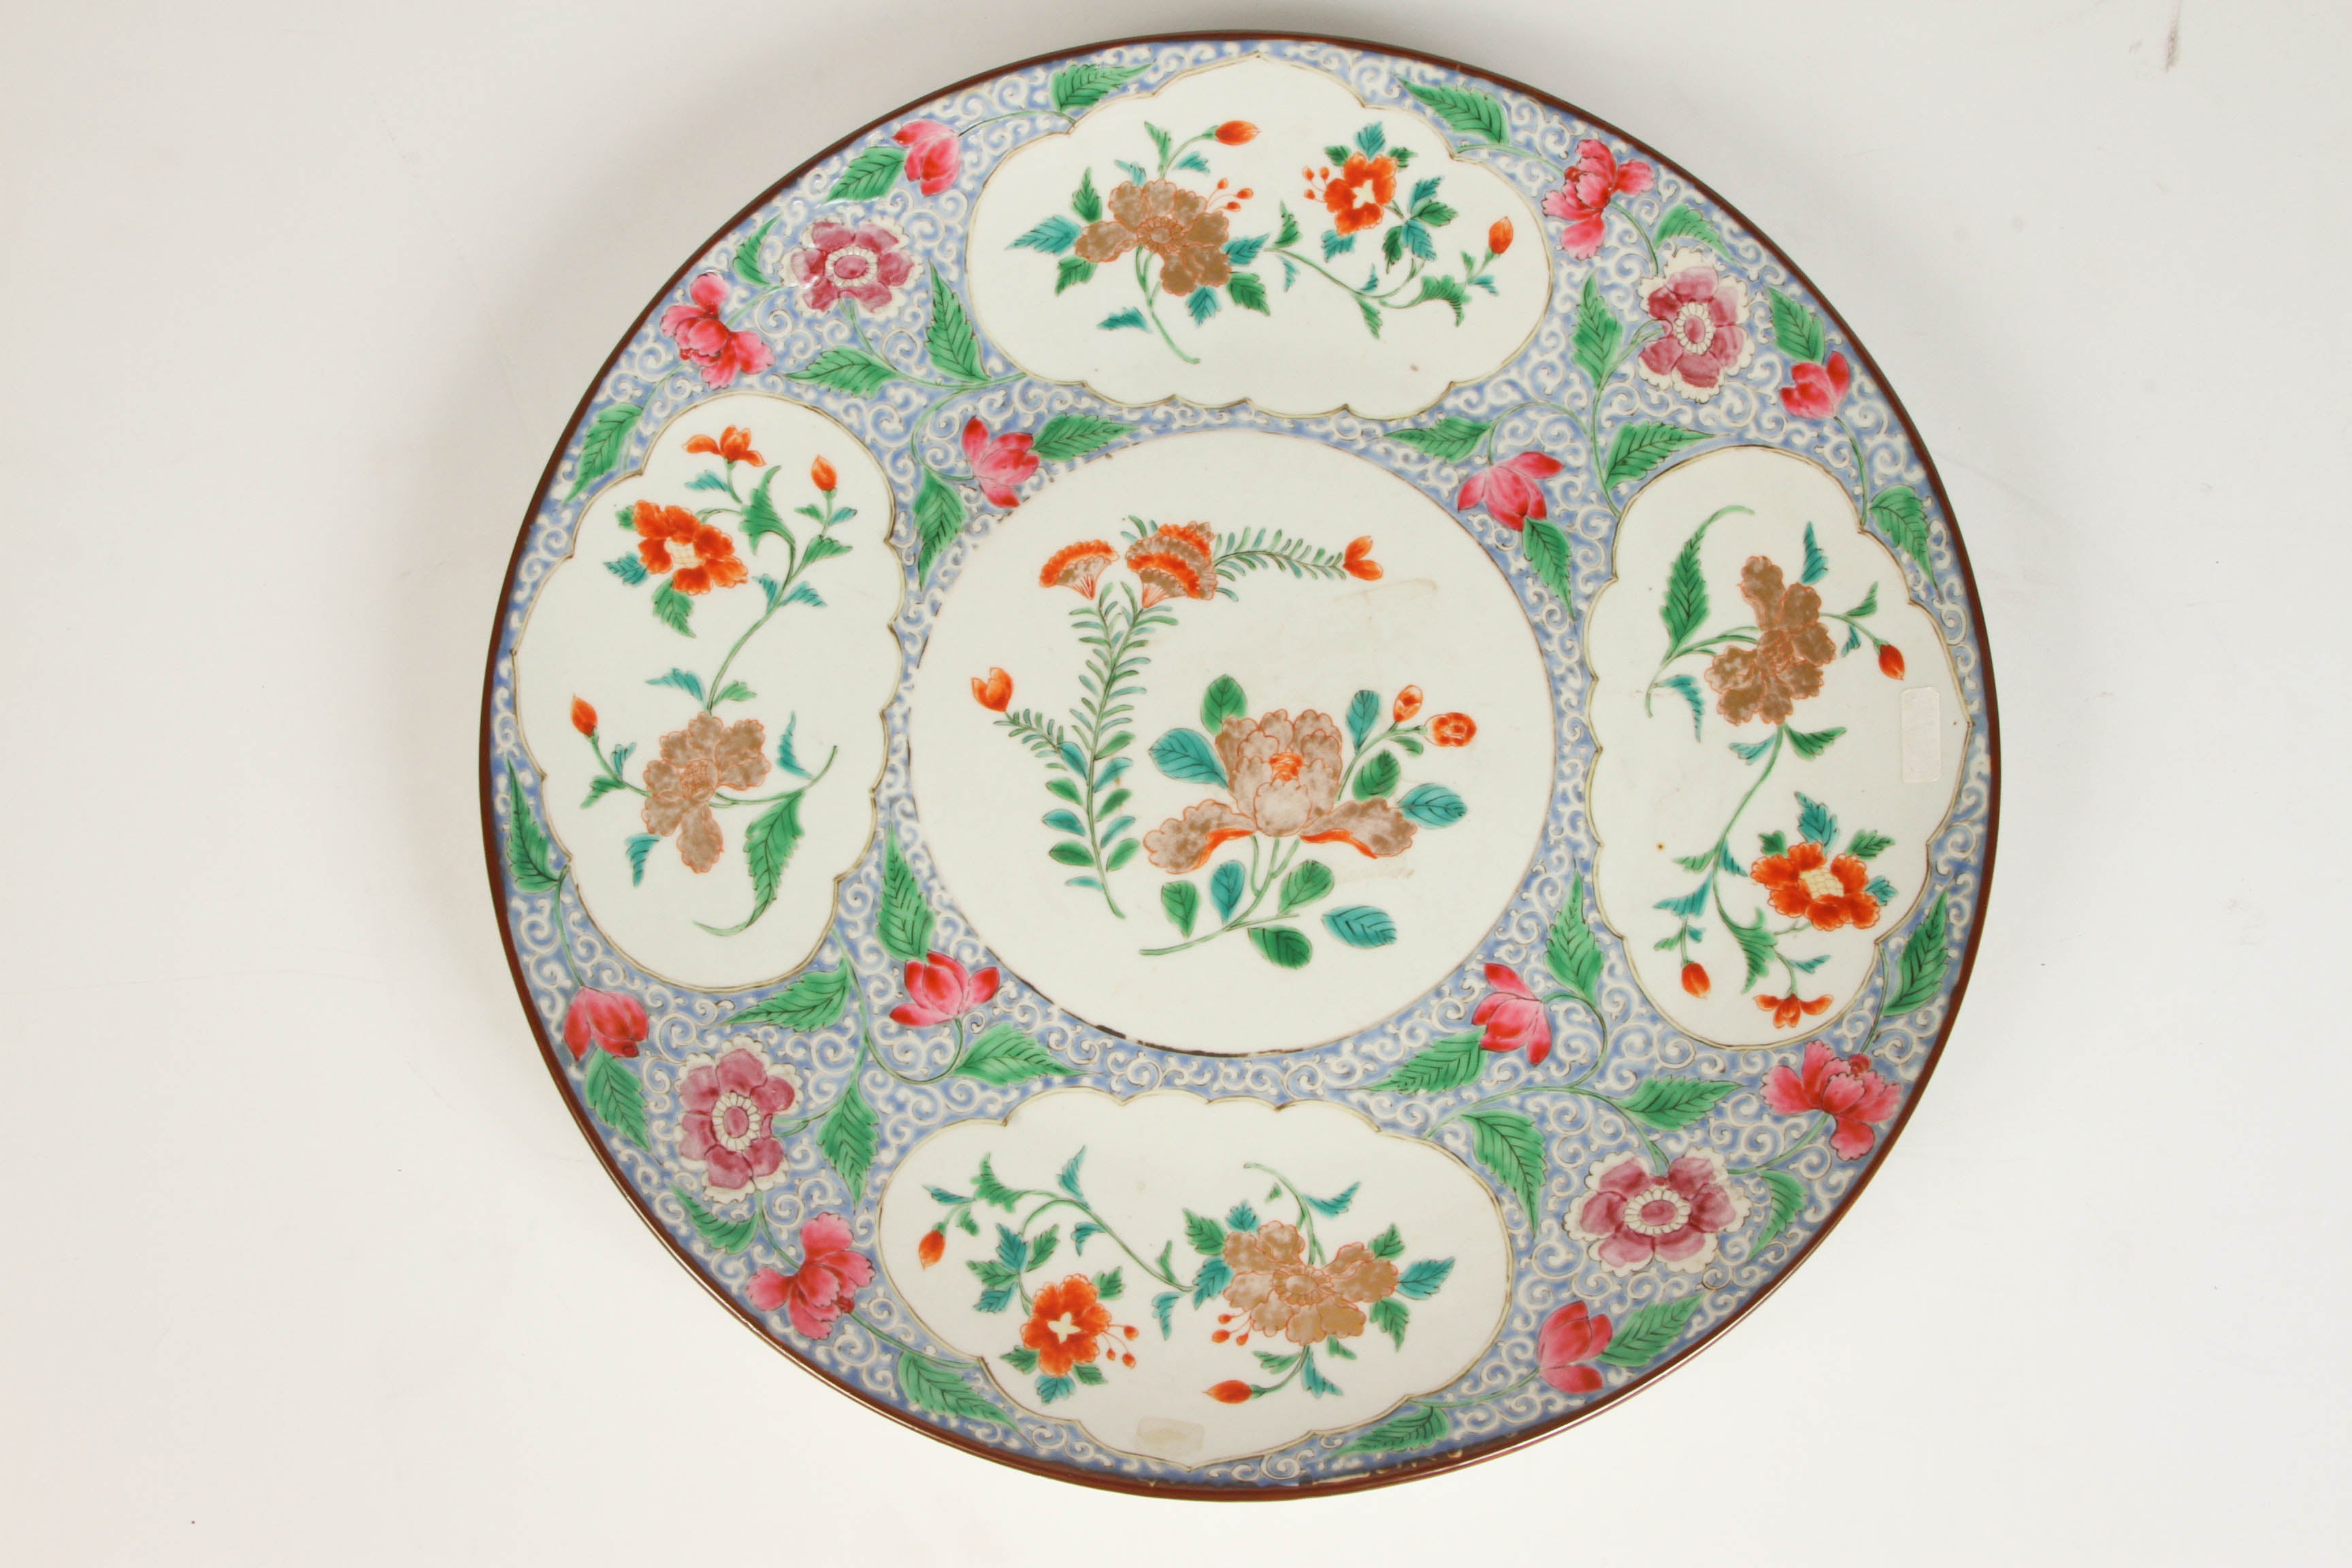 A large porcelain charger marked made in China for the Malaysian Market in the 19th century. The center of this charger is printed in a circular floral motif and there are similar delicate floral motifs around the perimeter.